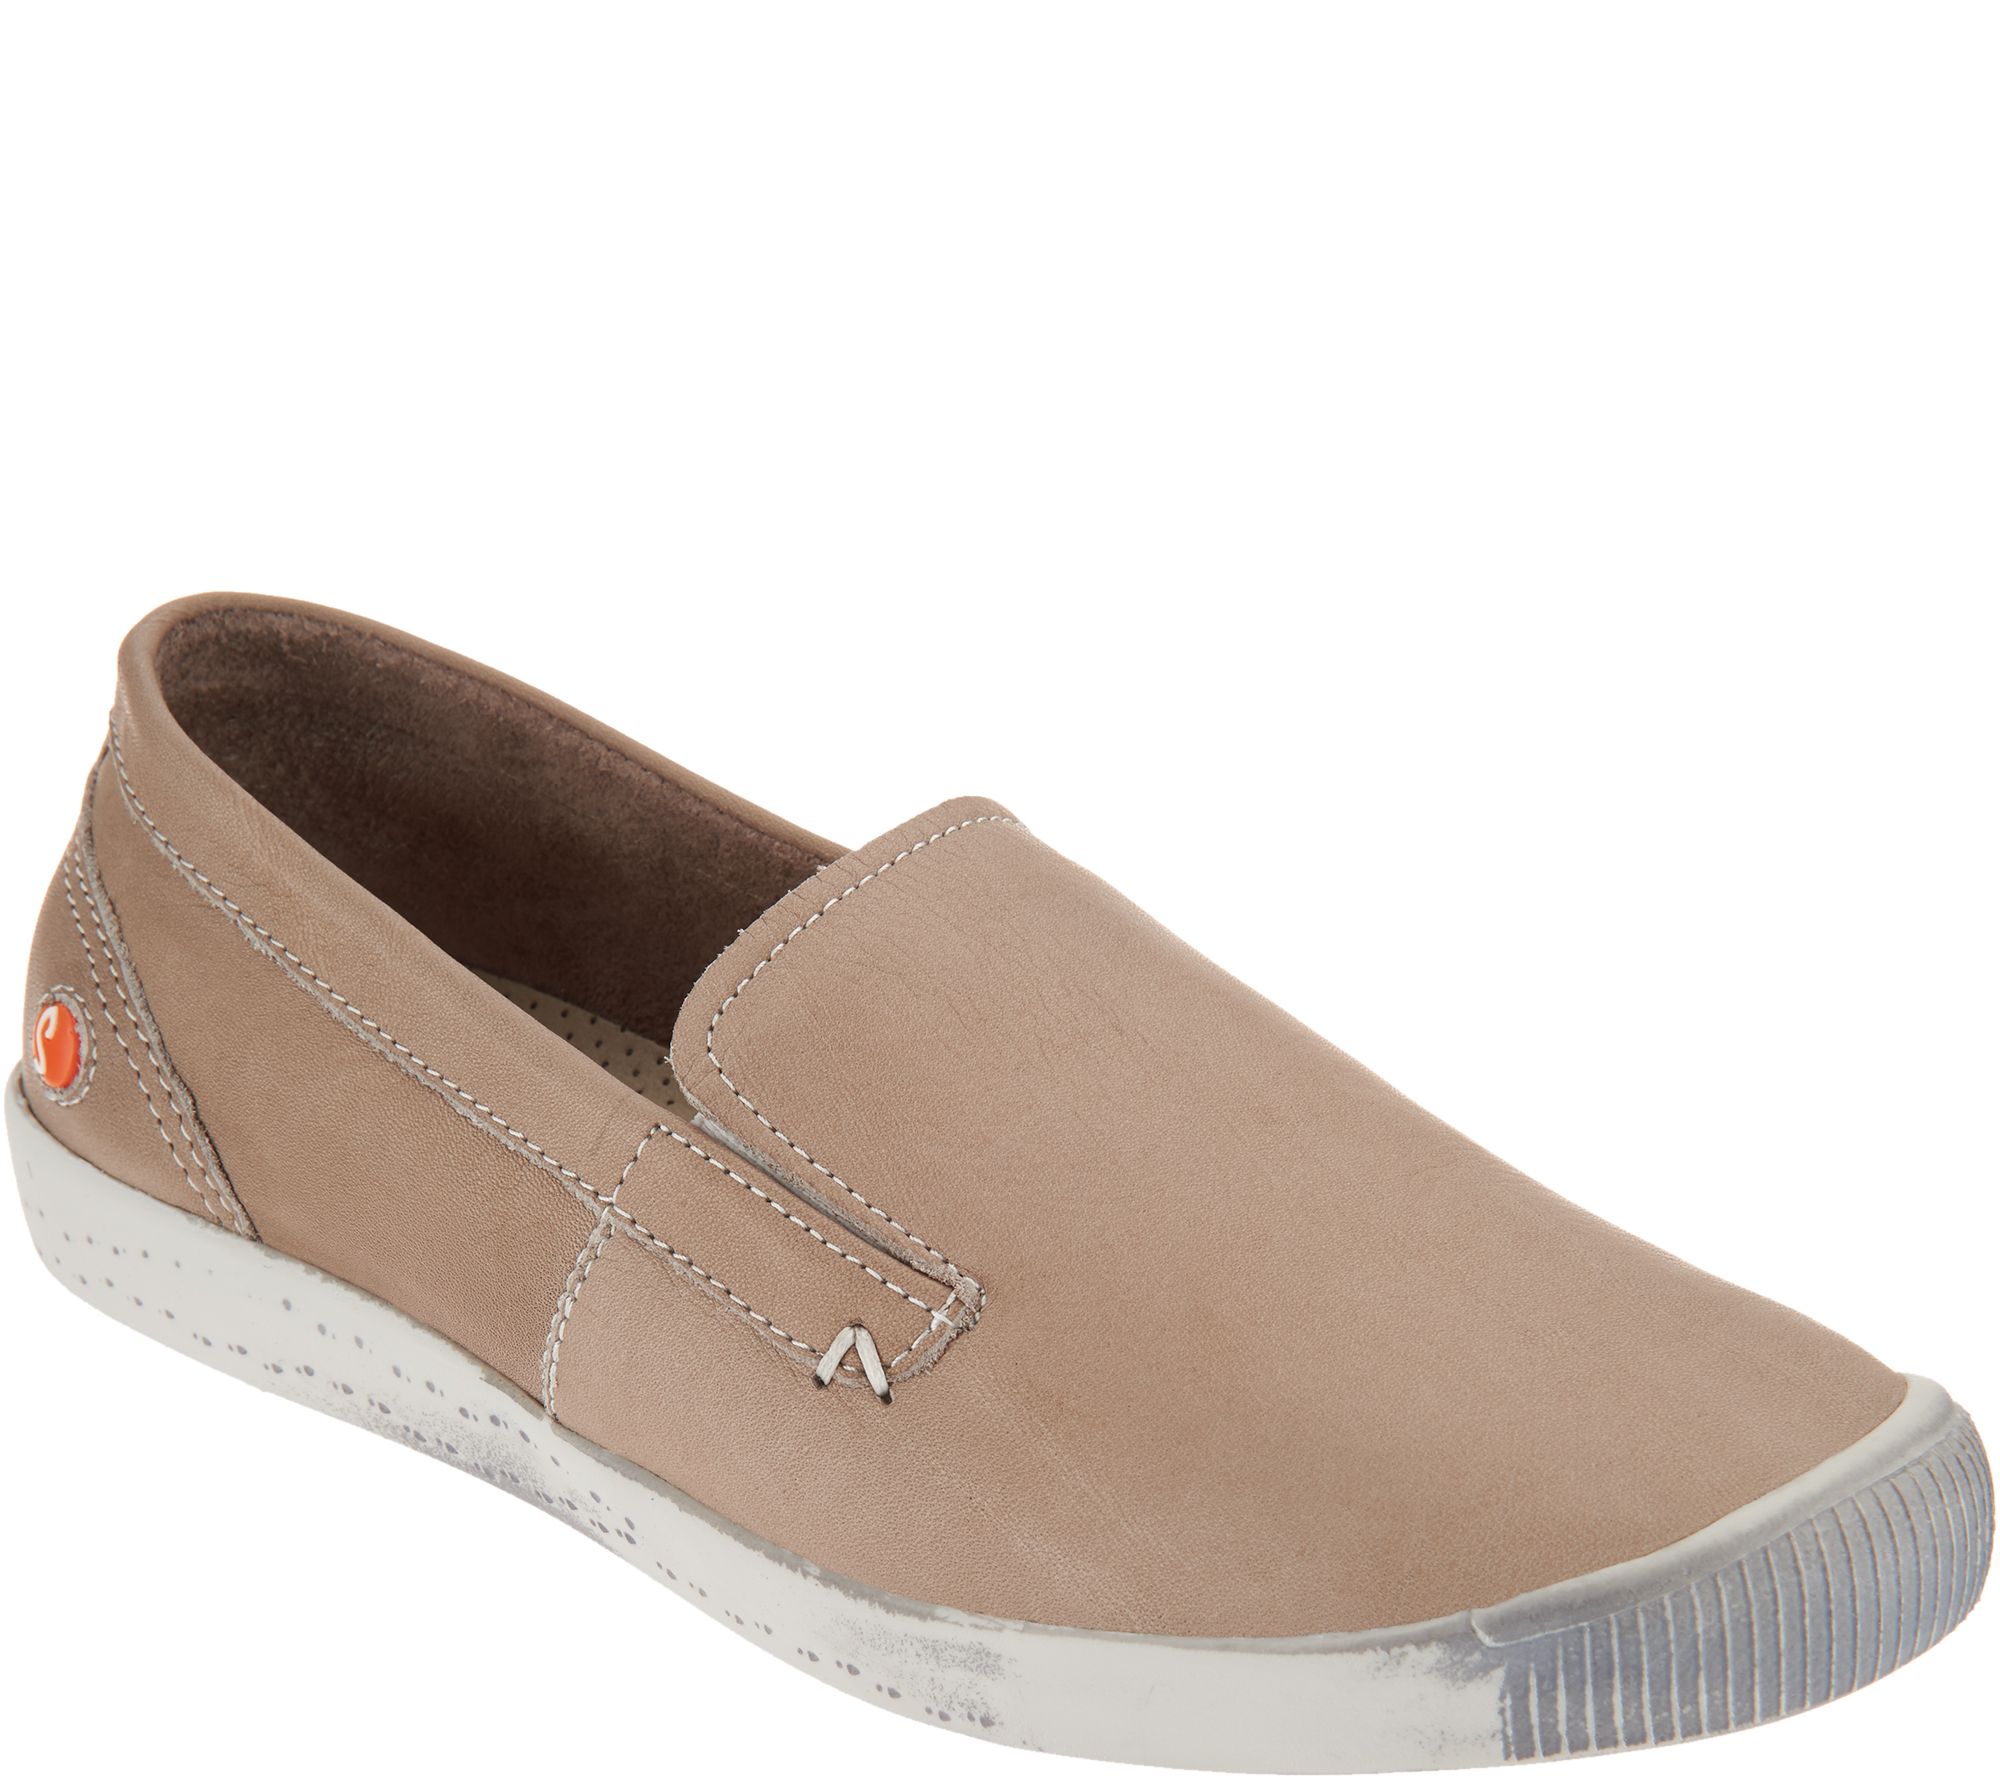 Softinos by FLY London Leather Slip-on Shoes - Ita - Page 1 — QVC.com